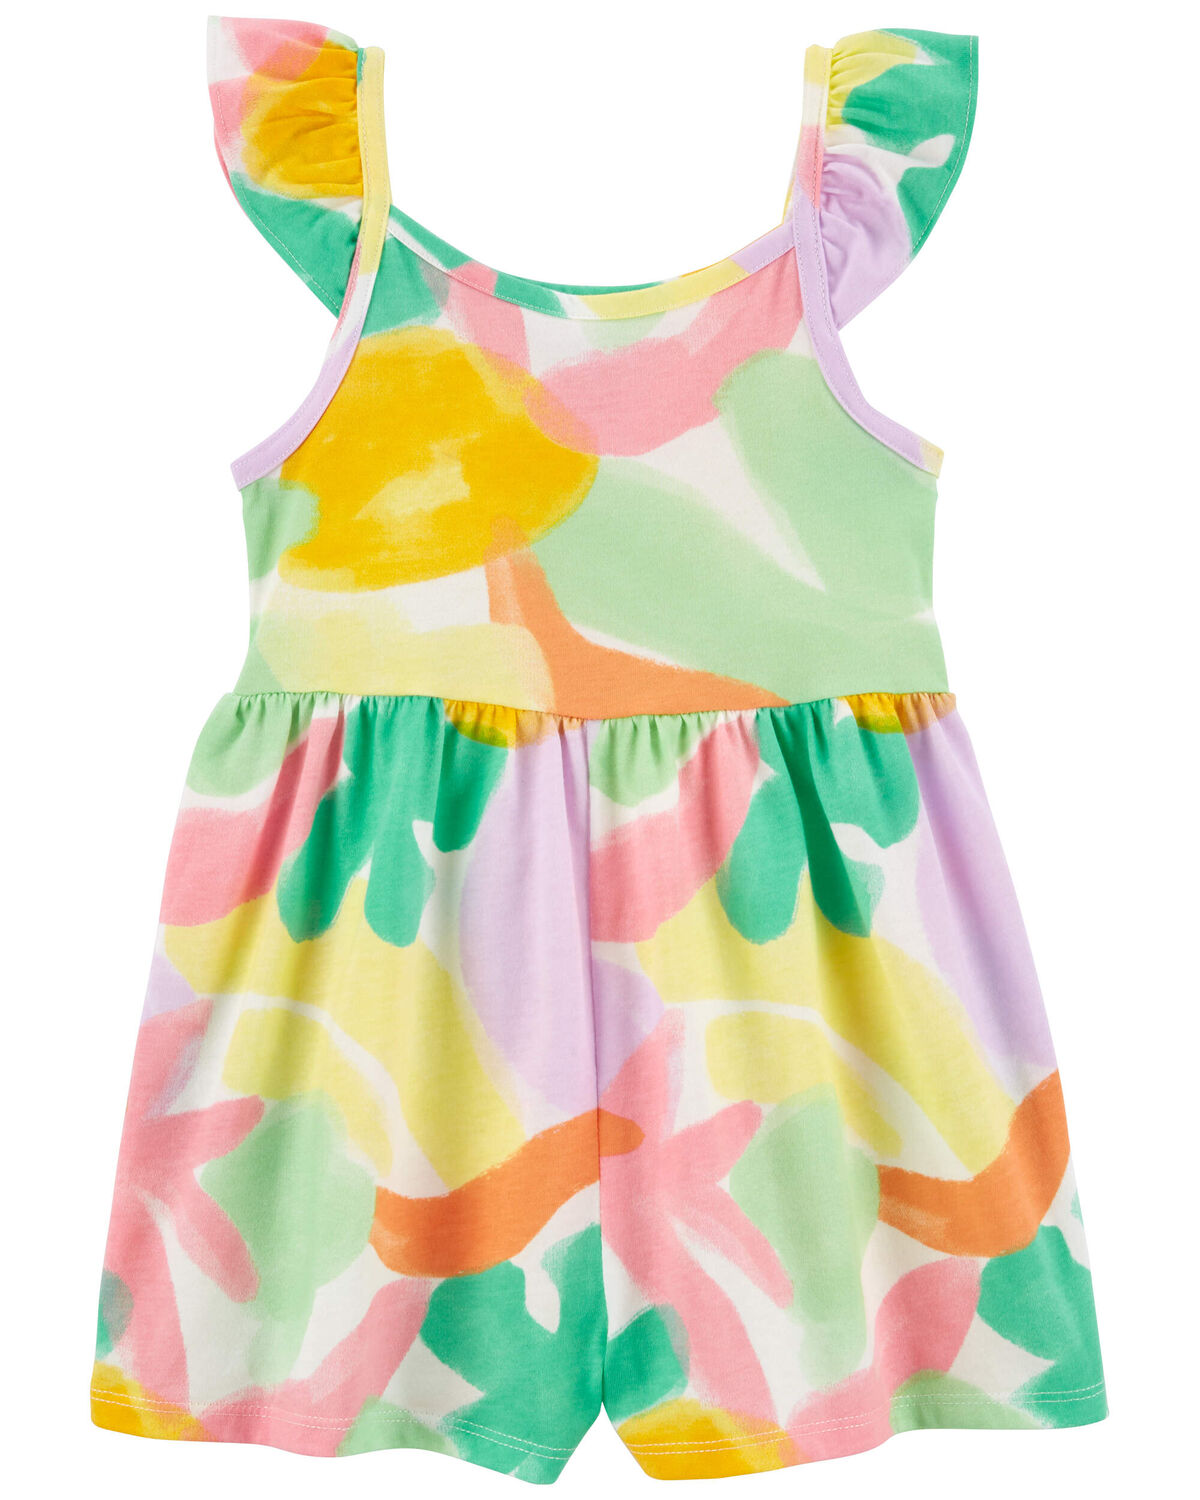 Toddler Abstract Print Cotton Romper